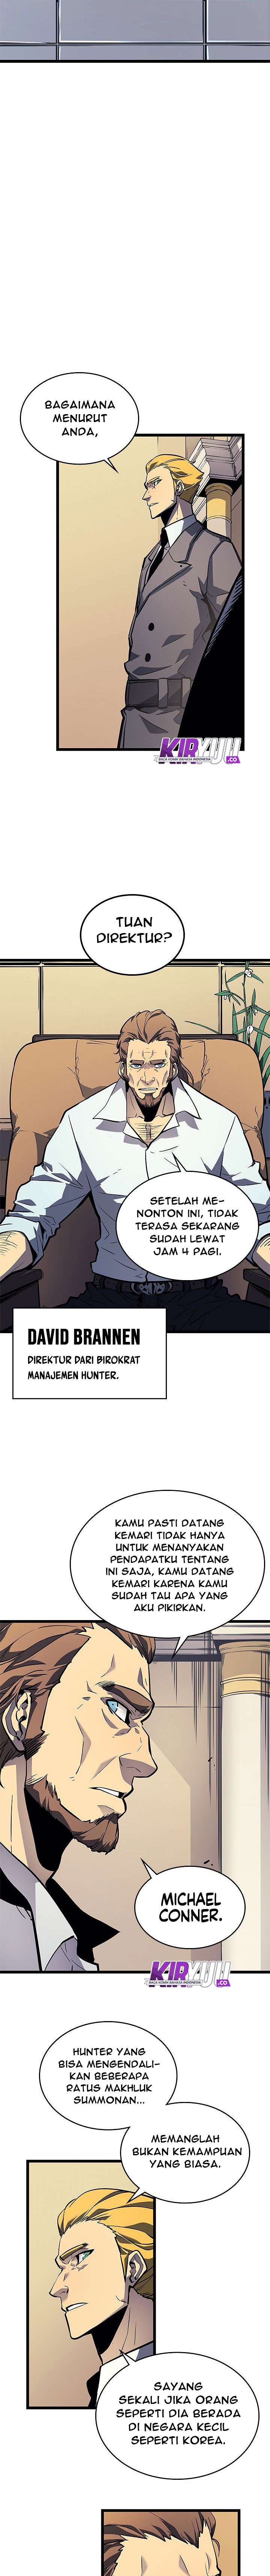 Solo Leveling Chapter 105 Bahasa Indonesia